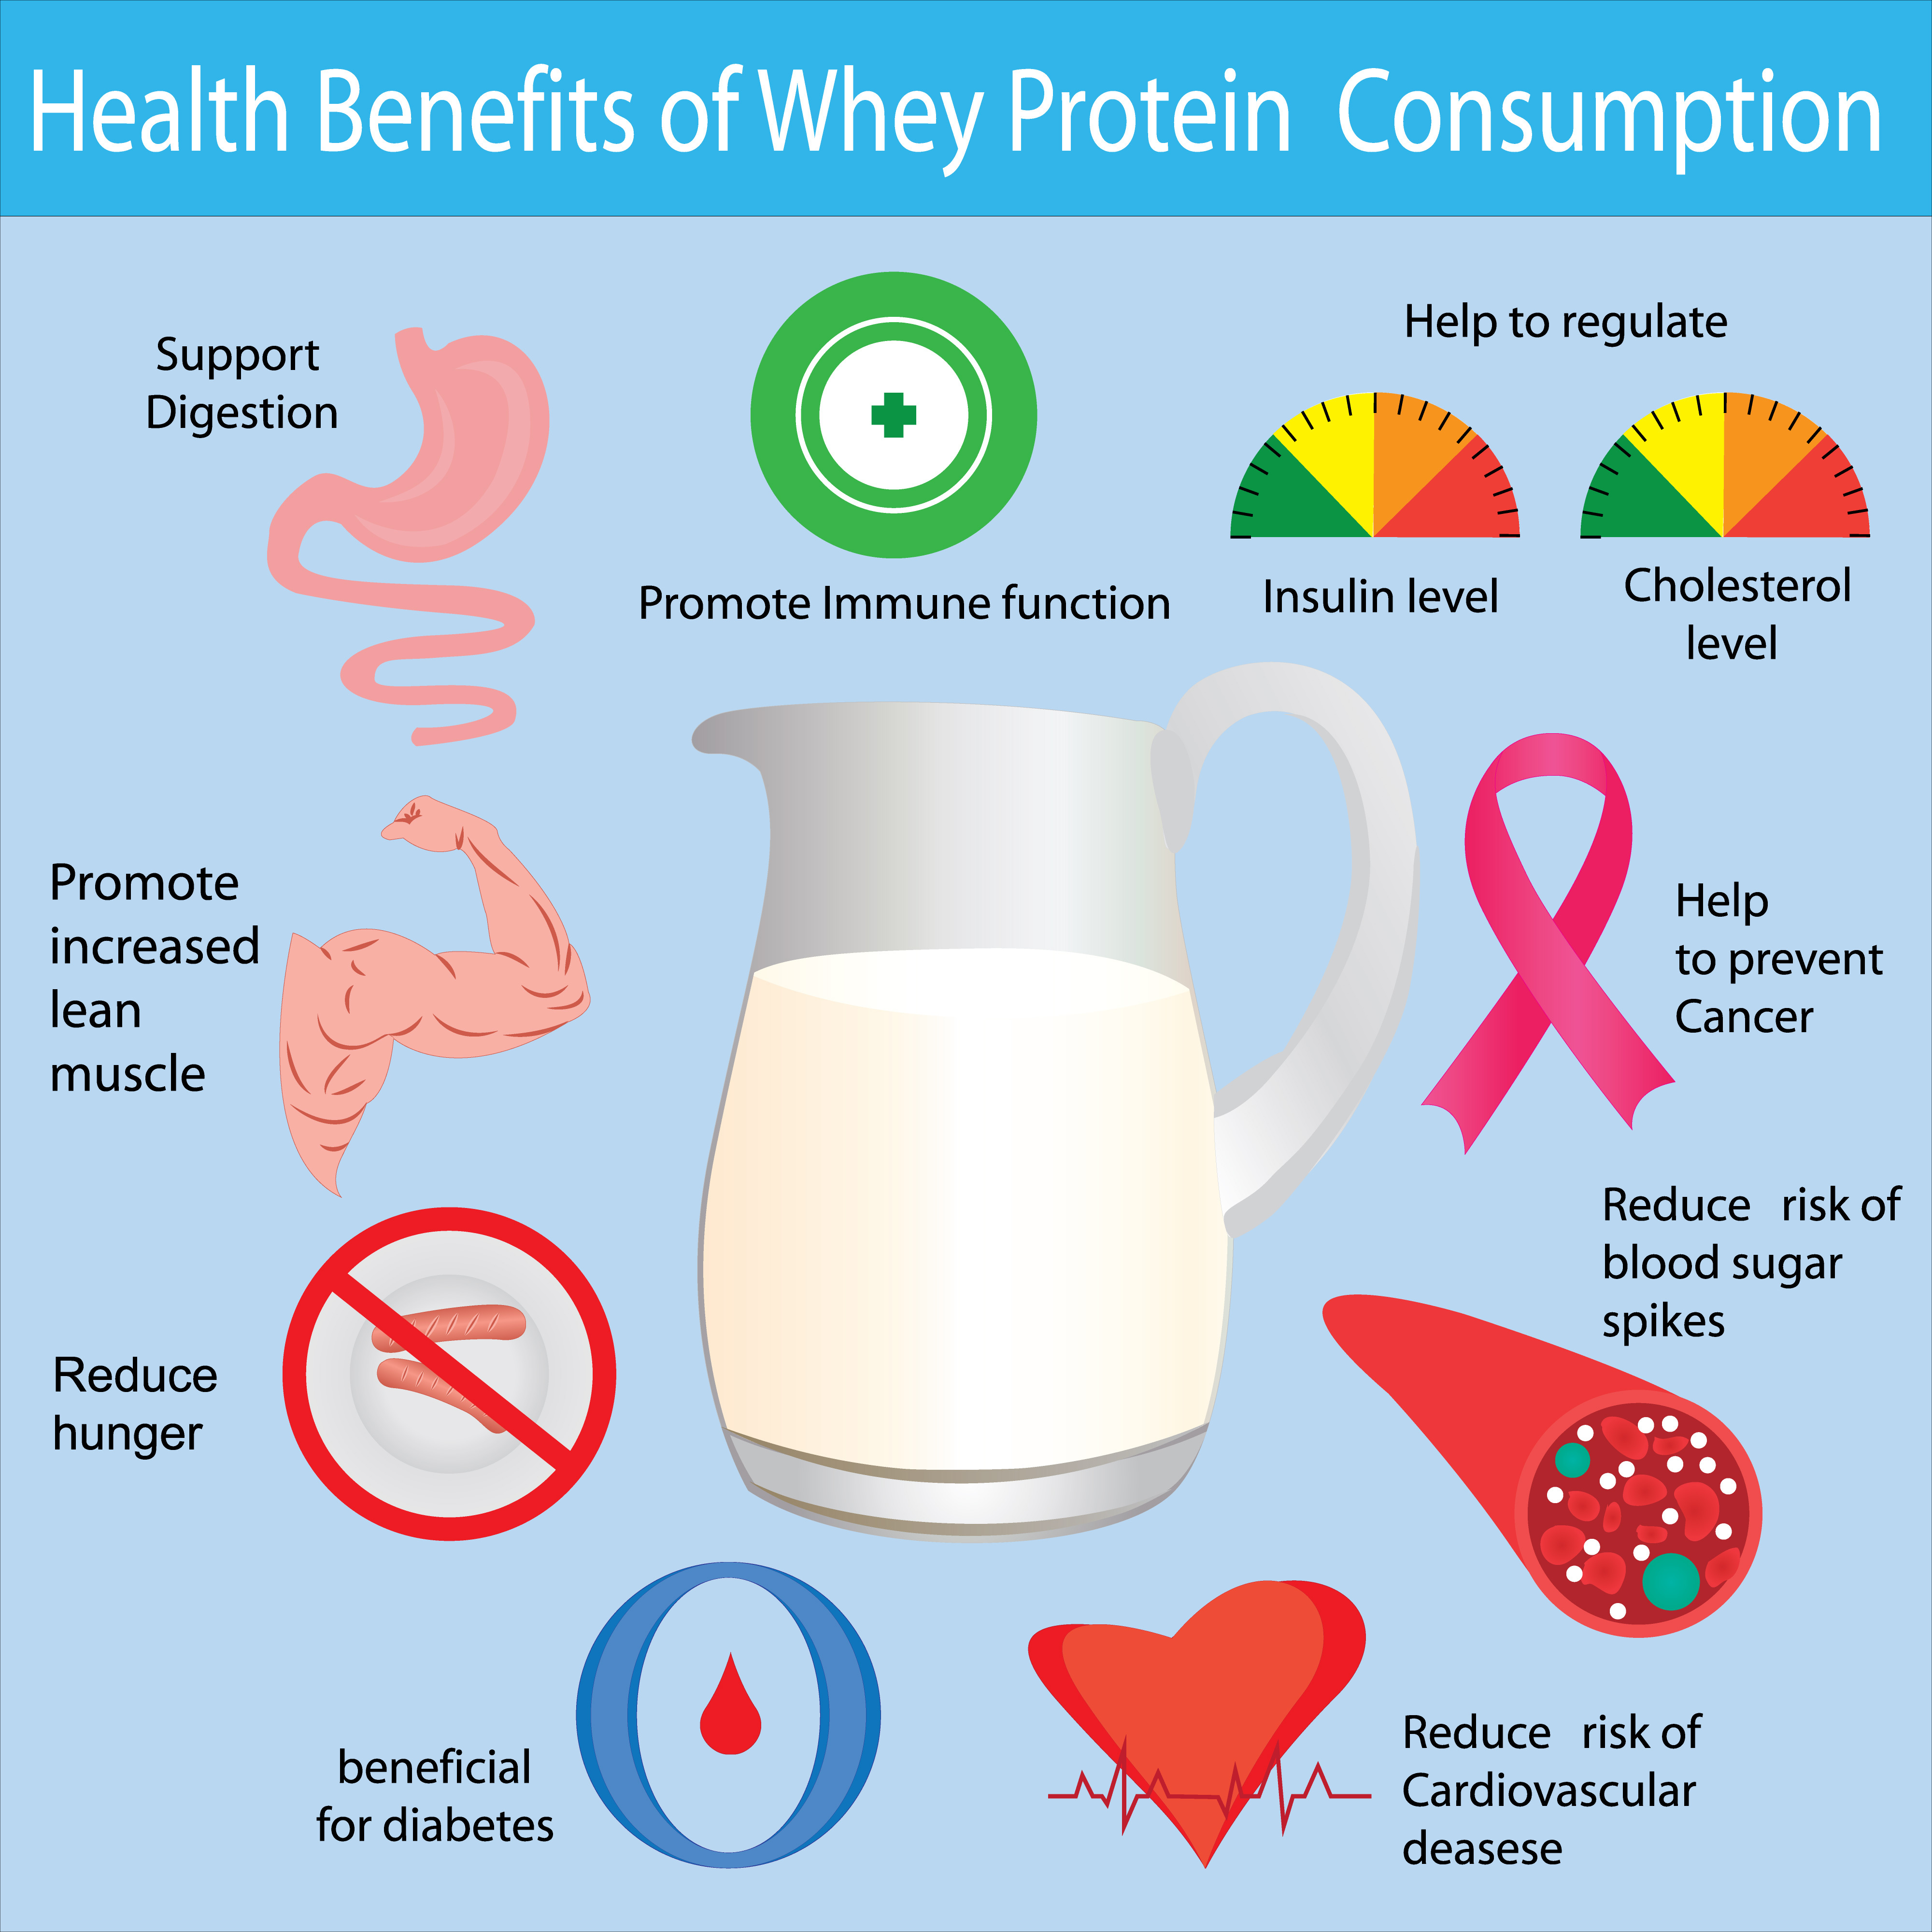 The most important benefits of whey proteins